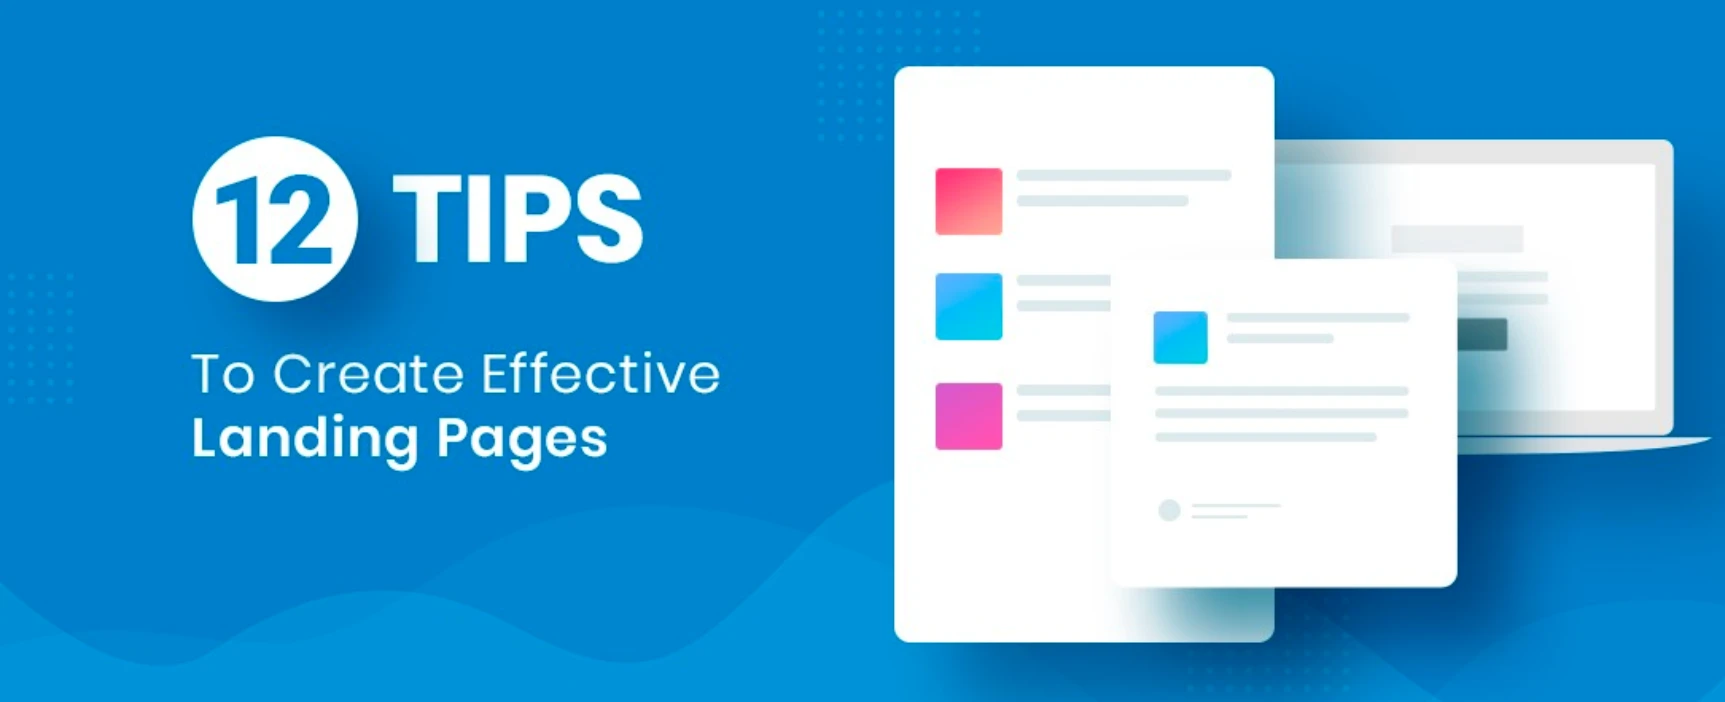 Tips for creating landing pages